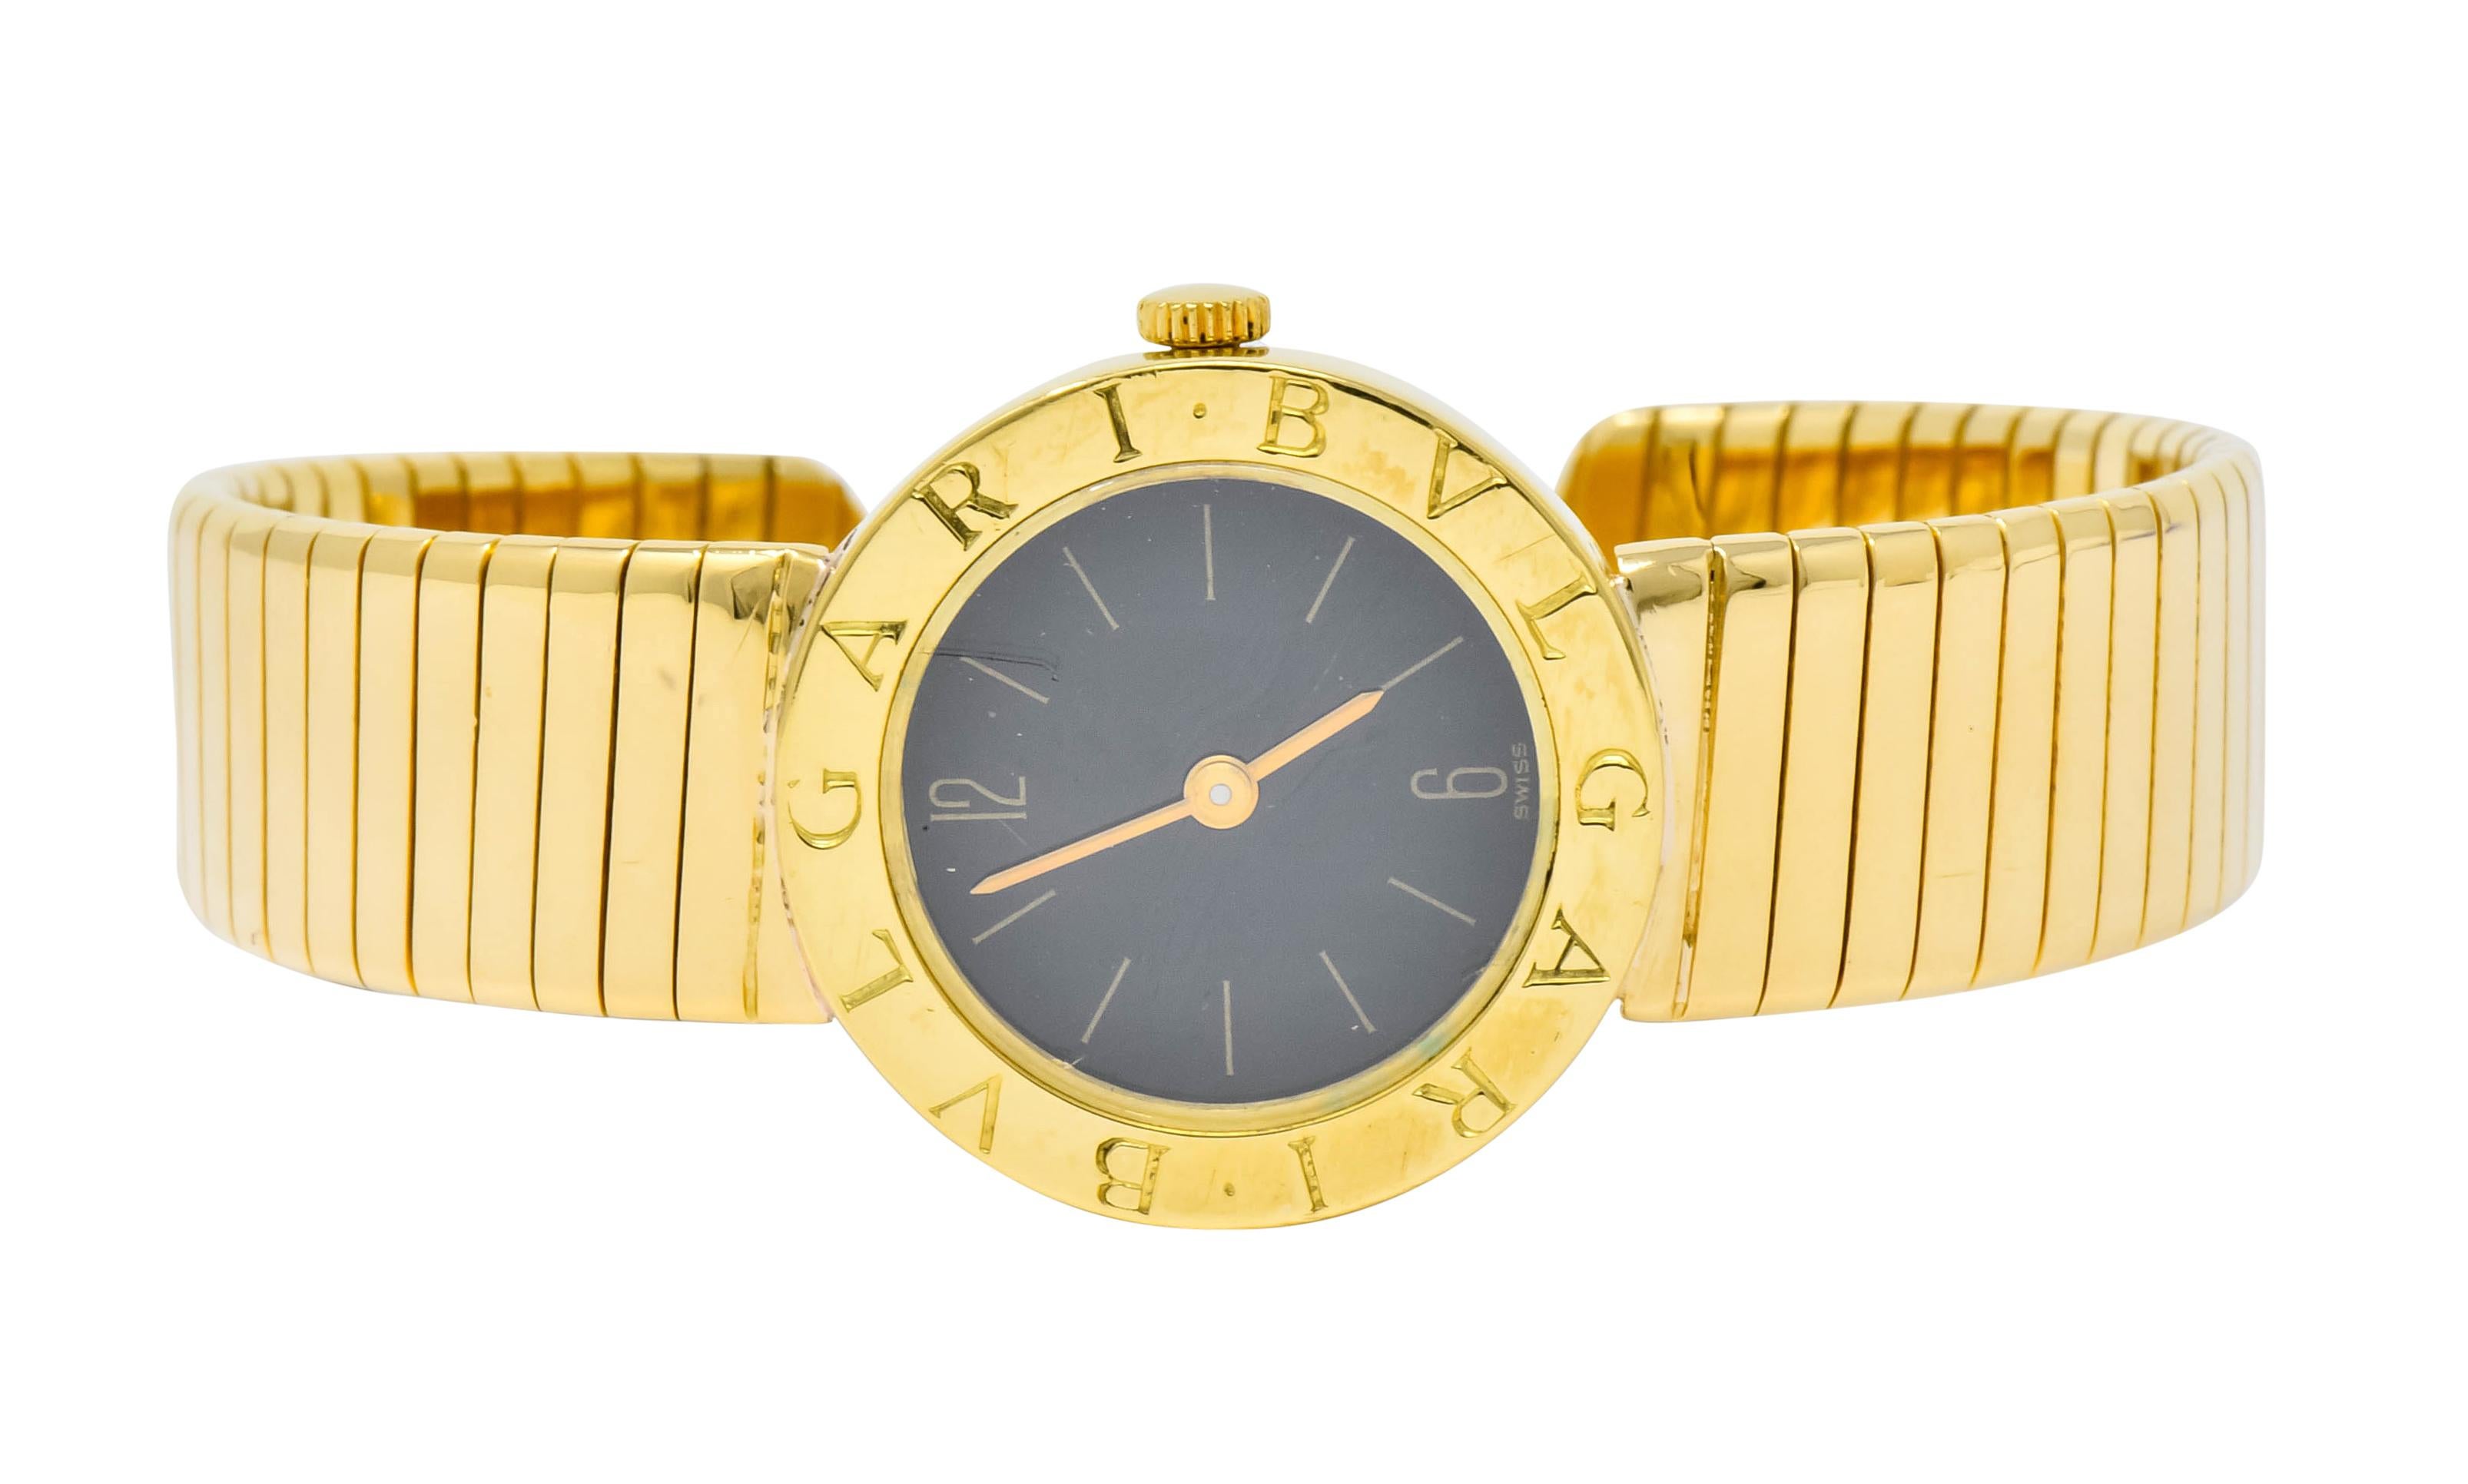 Featuring an 18 karat gold flexible tubogas link cuff band

Centering a black dial with polished gold markers, covered by crystal

With circular polished gold surround deeply engraved Bvlgari

Tested as 18 karat gold

Fully signed Bvlgari and